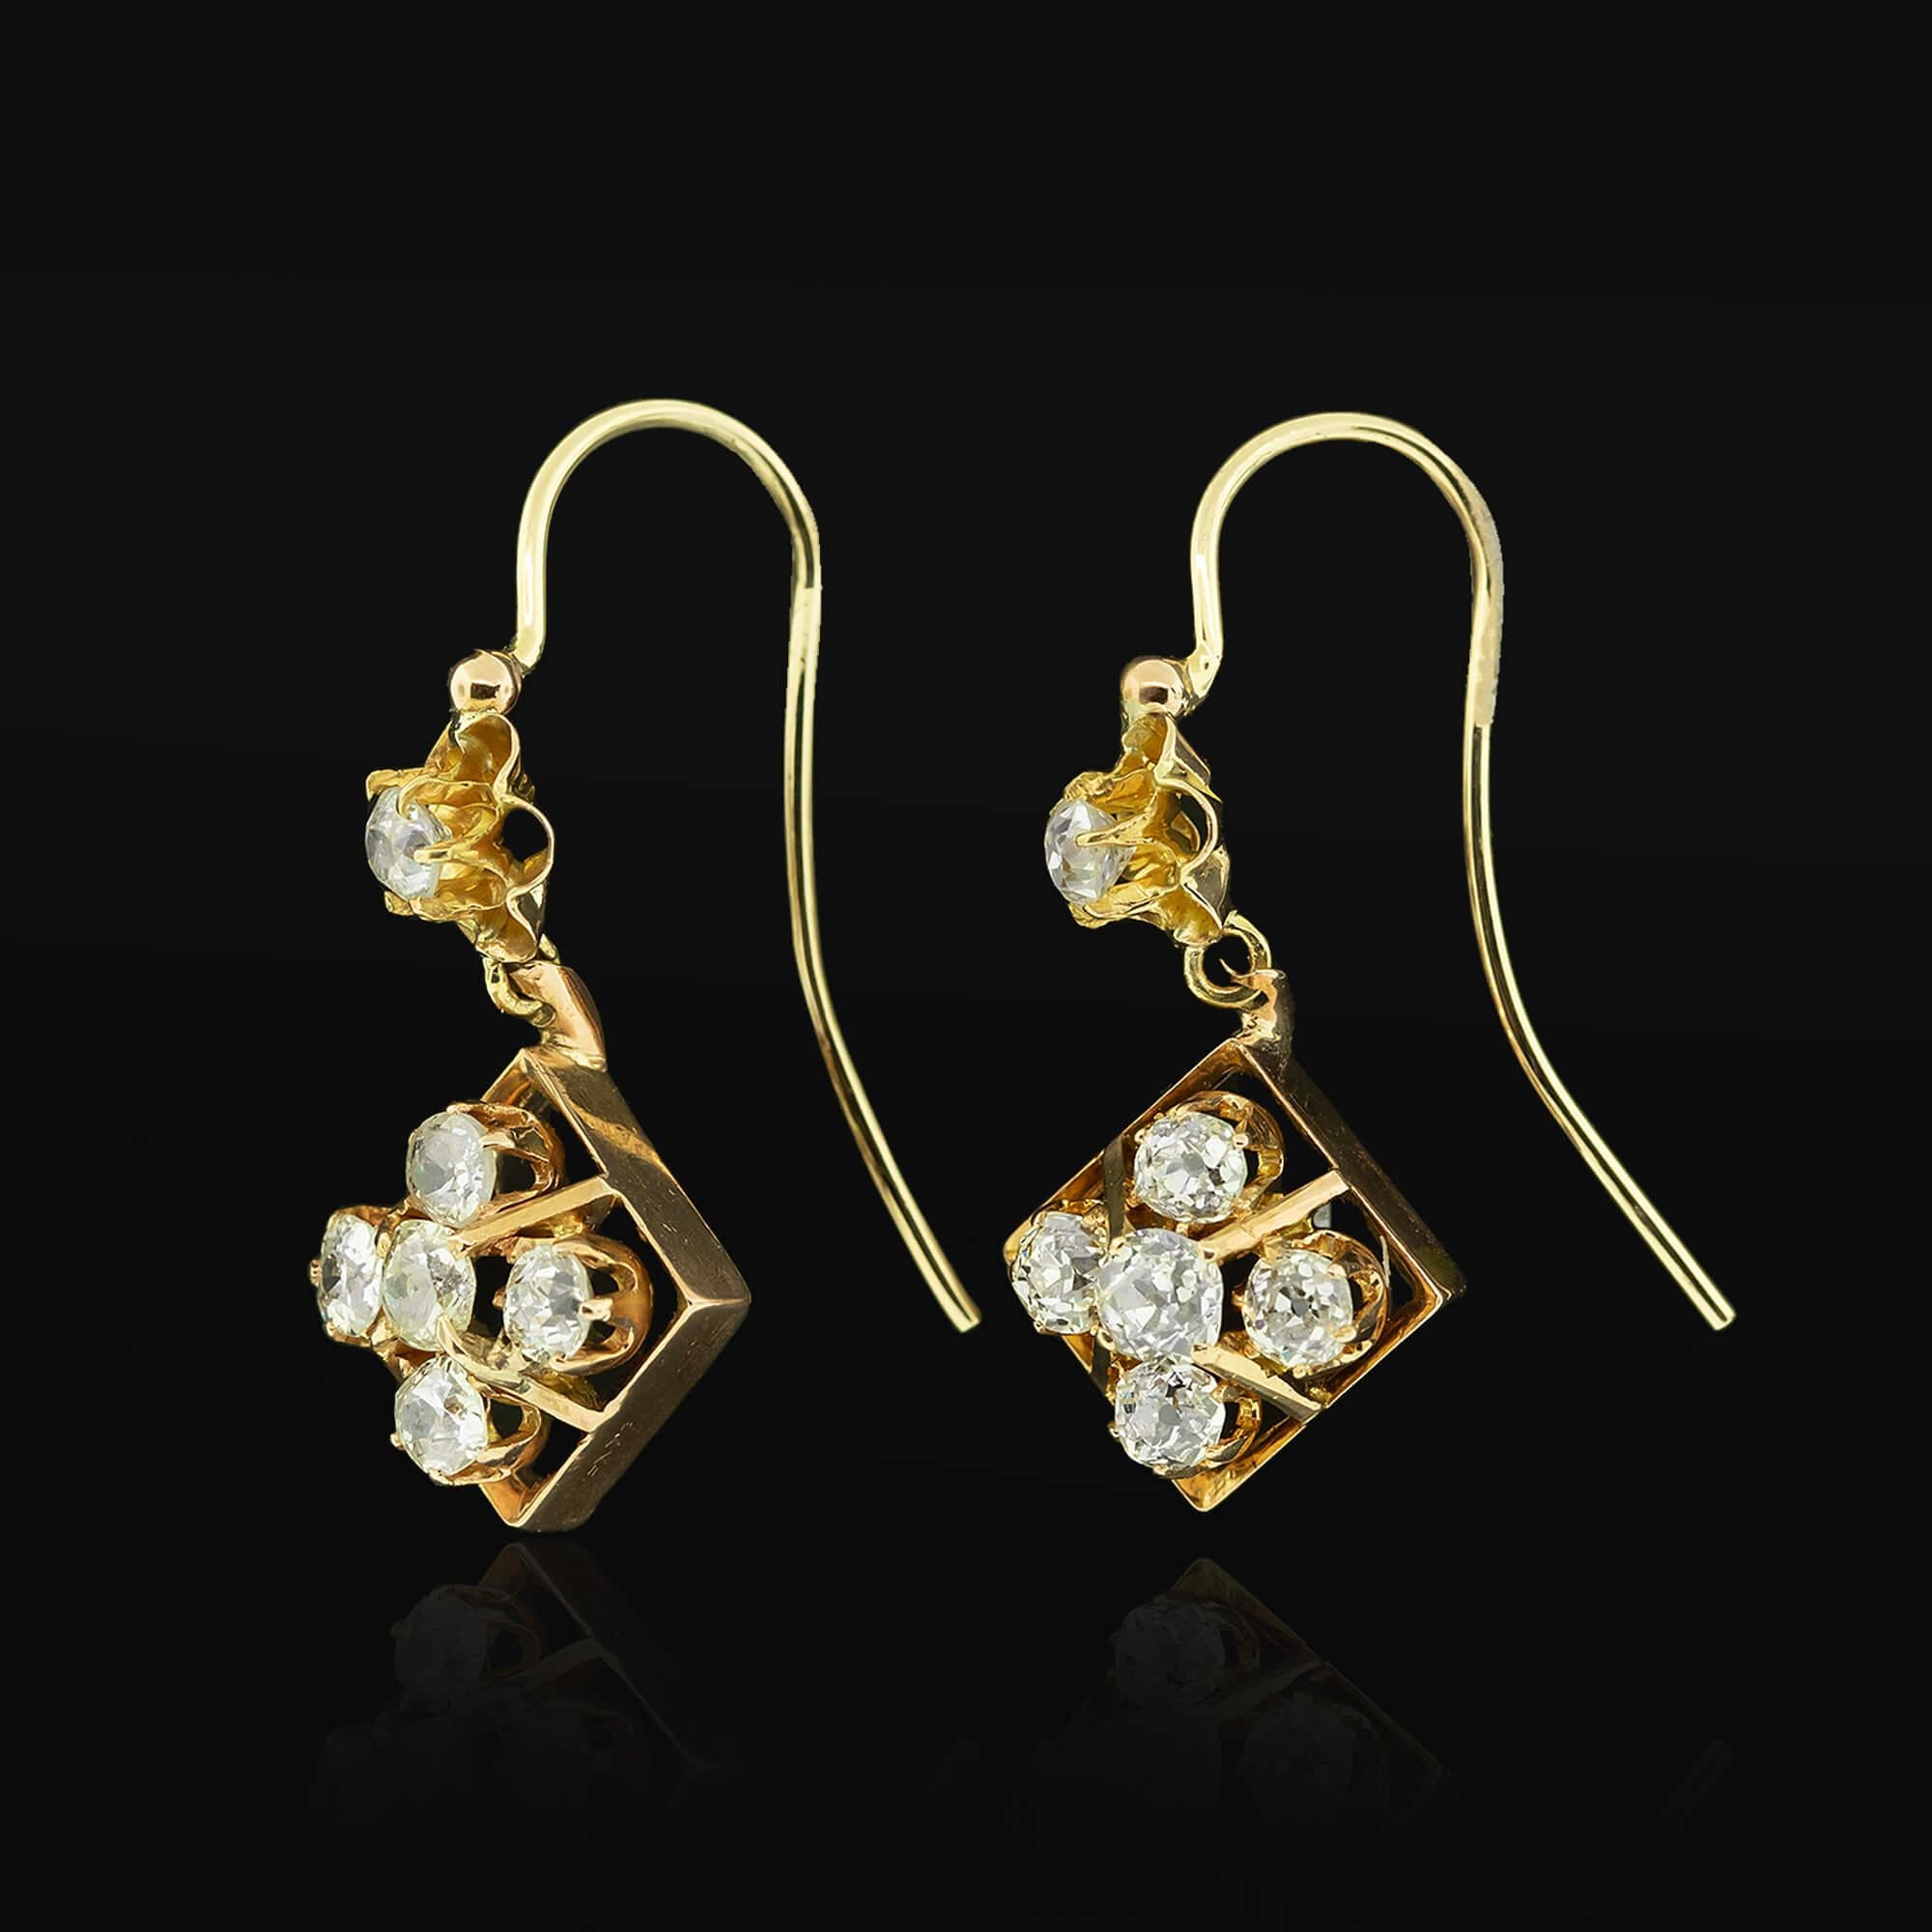 Edwardian Diamond Drop Earrings Circa 1900-10 In Good Condition For Sale In ADELAIDE, SA